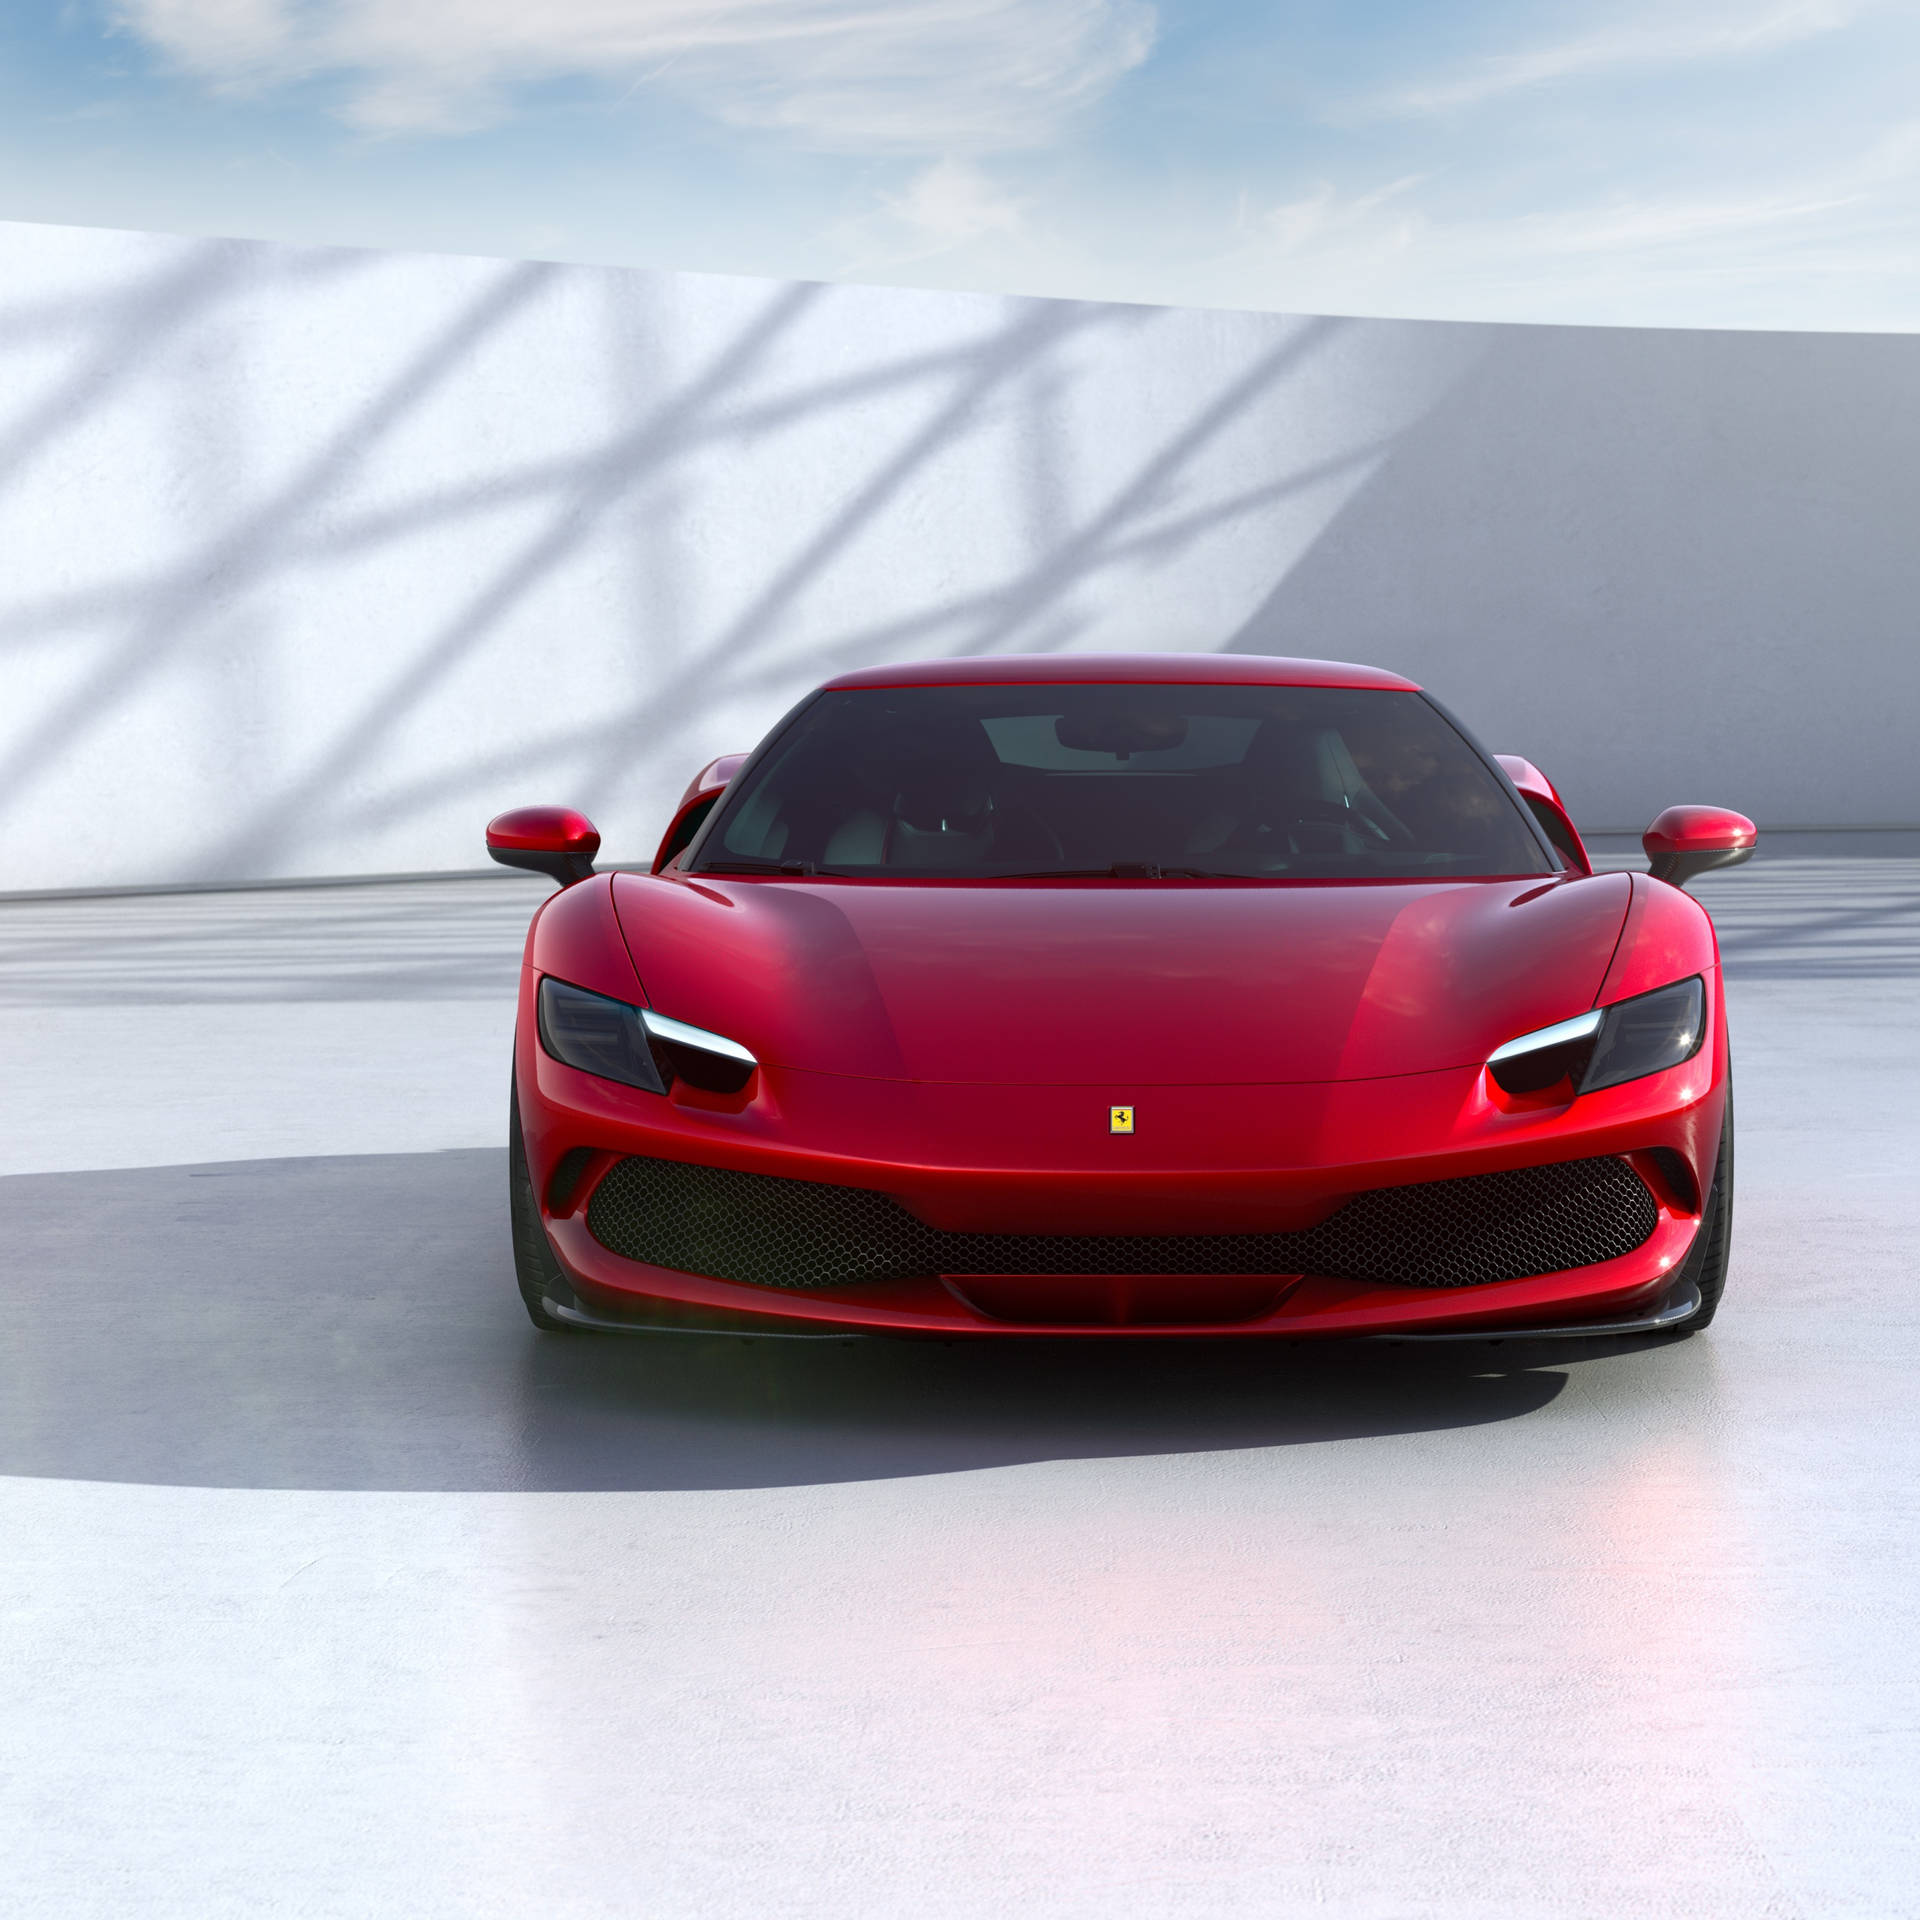 4k Red Car In White Room Background